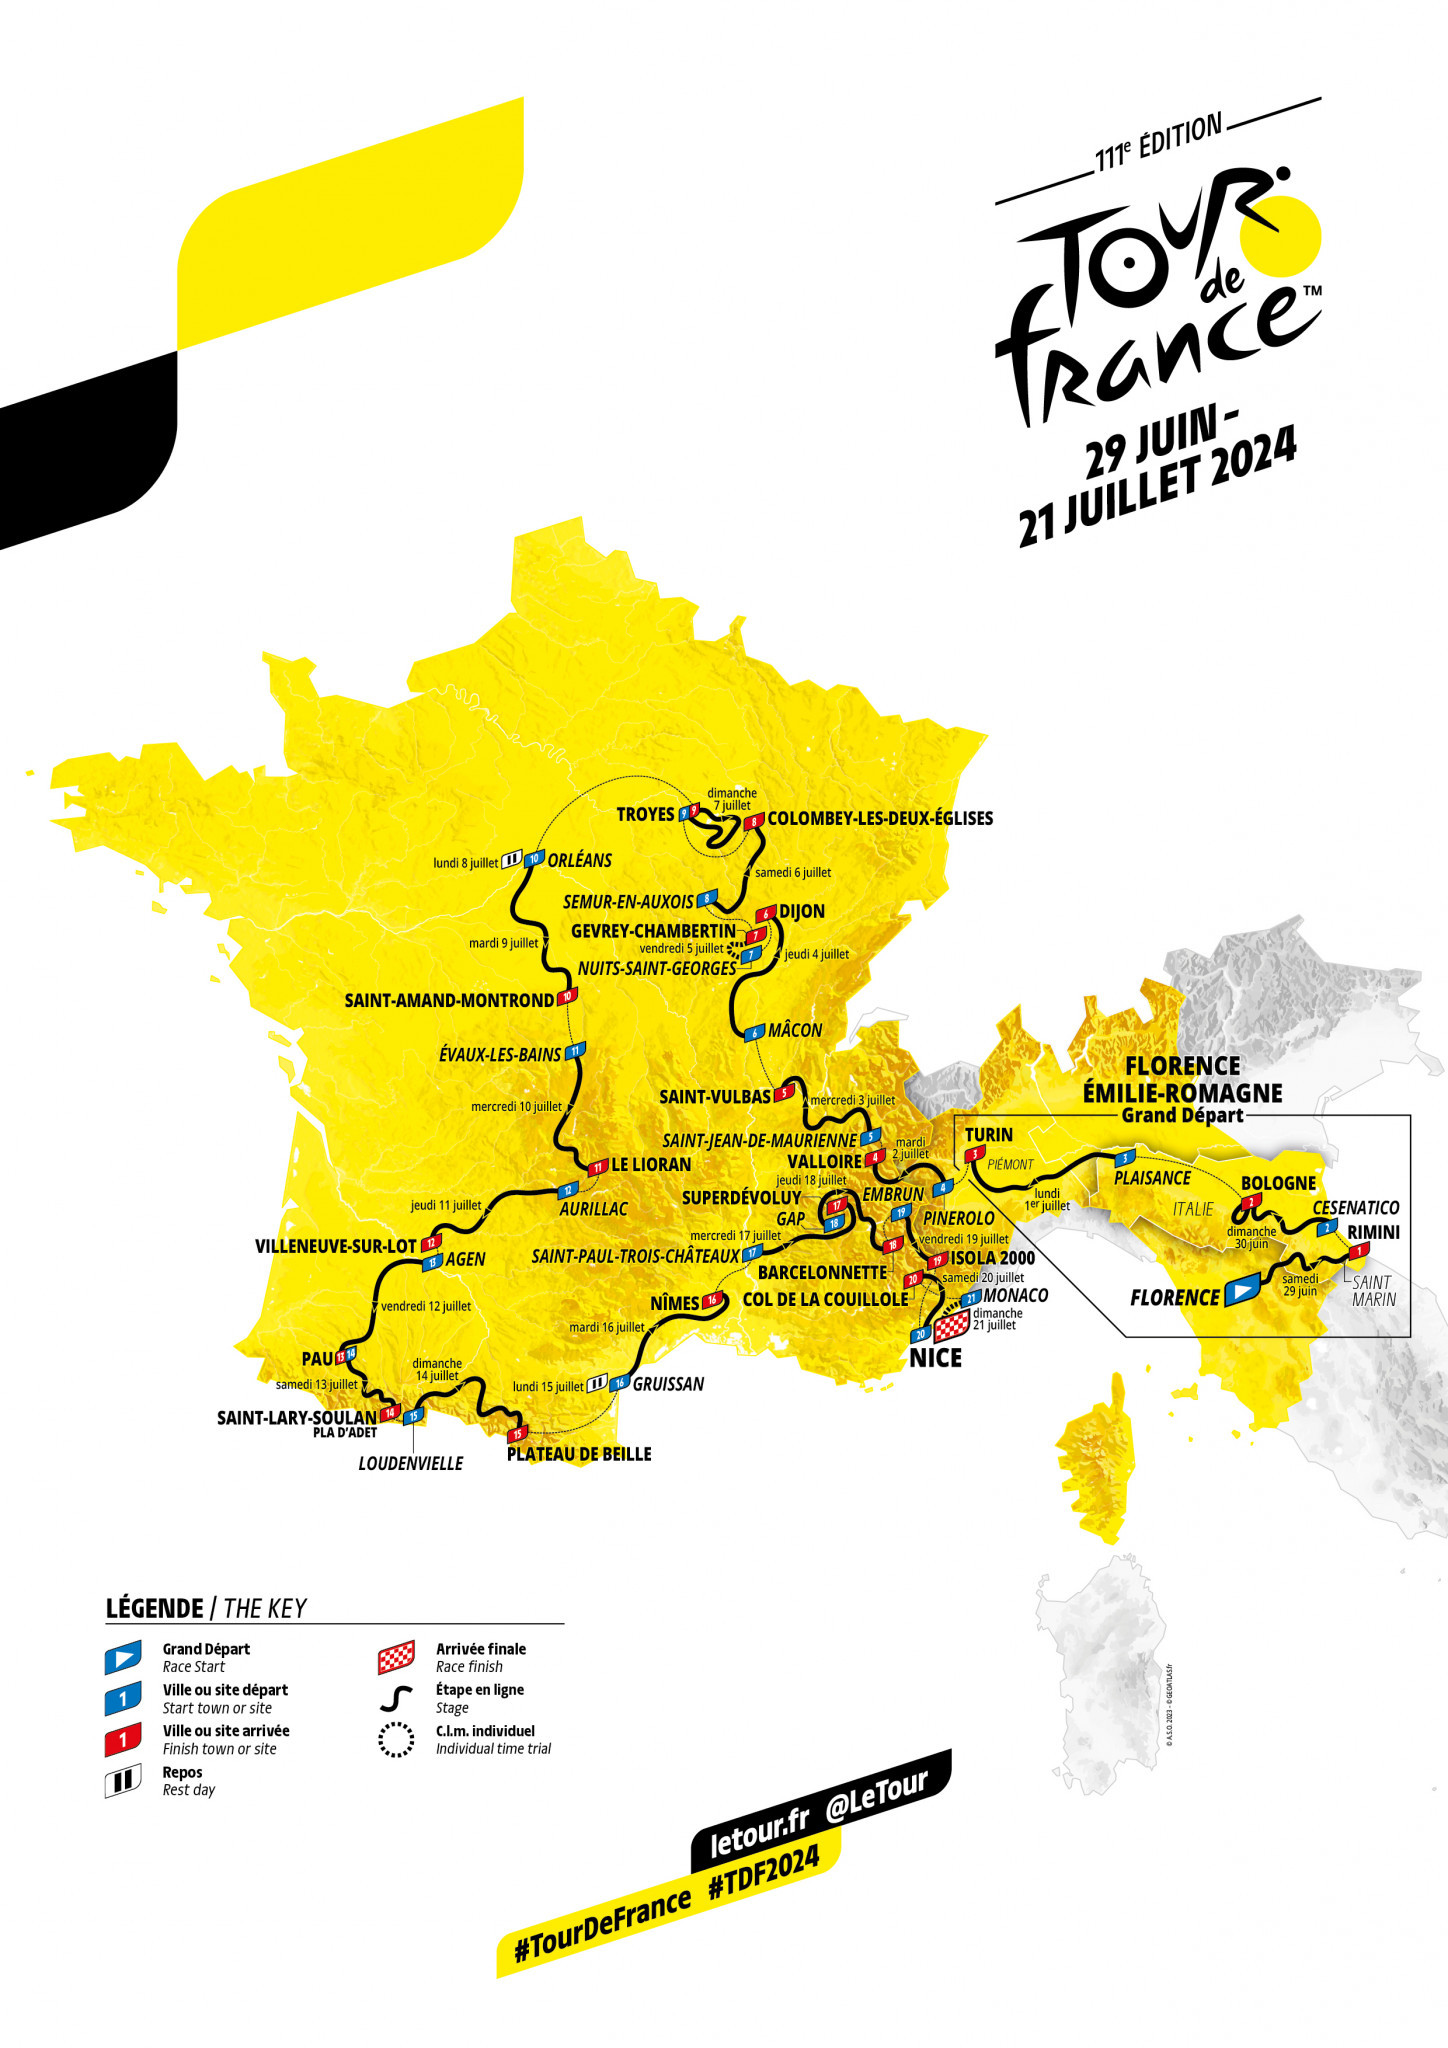 The route avoids Paris for the first time and features a competitive last stage time trial ©Tour de France